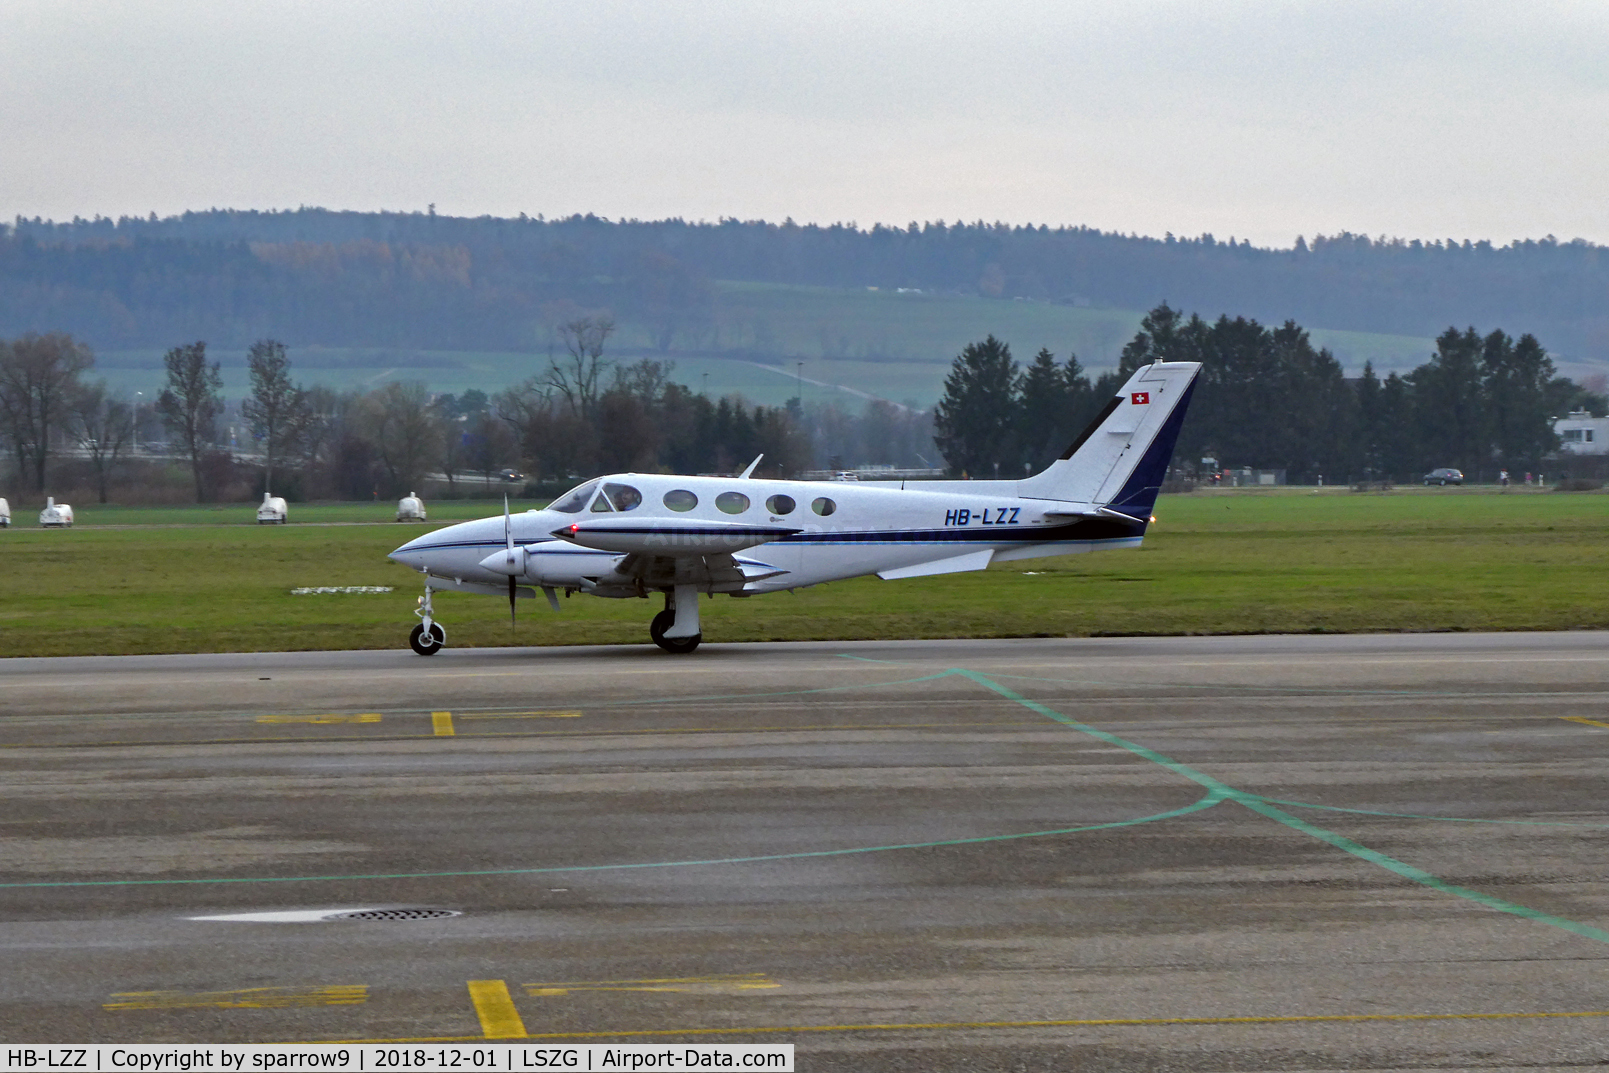 HB-LZZ, 1979 Cessna 340A C/N 340A0731, At Grenchen.